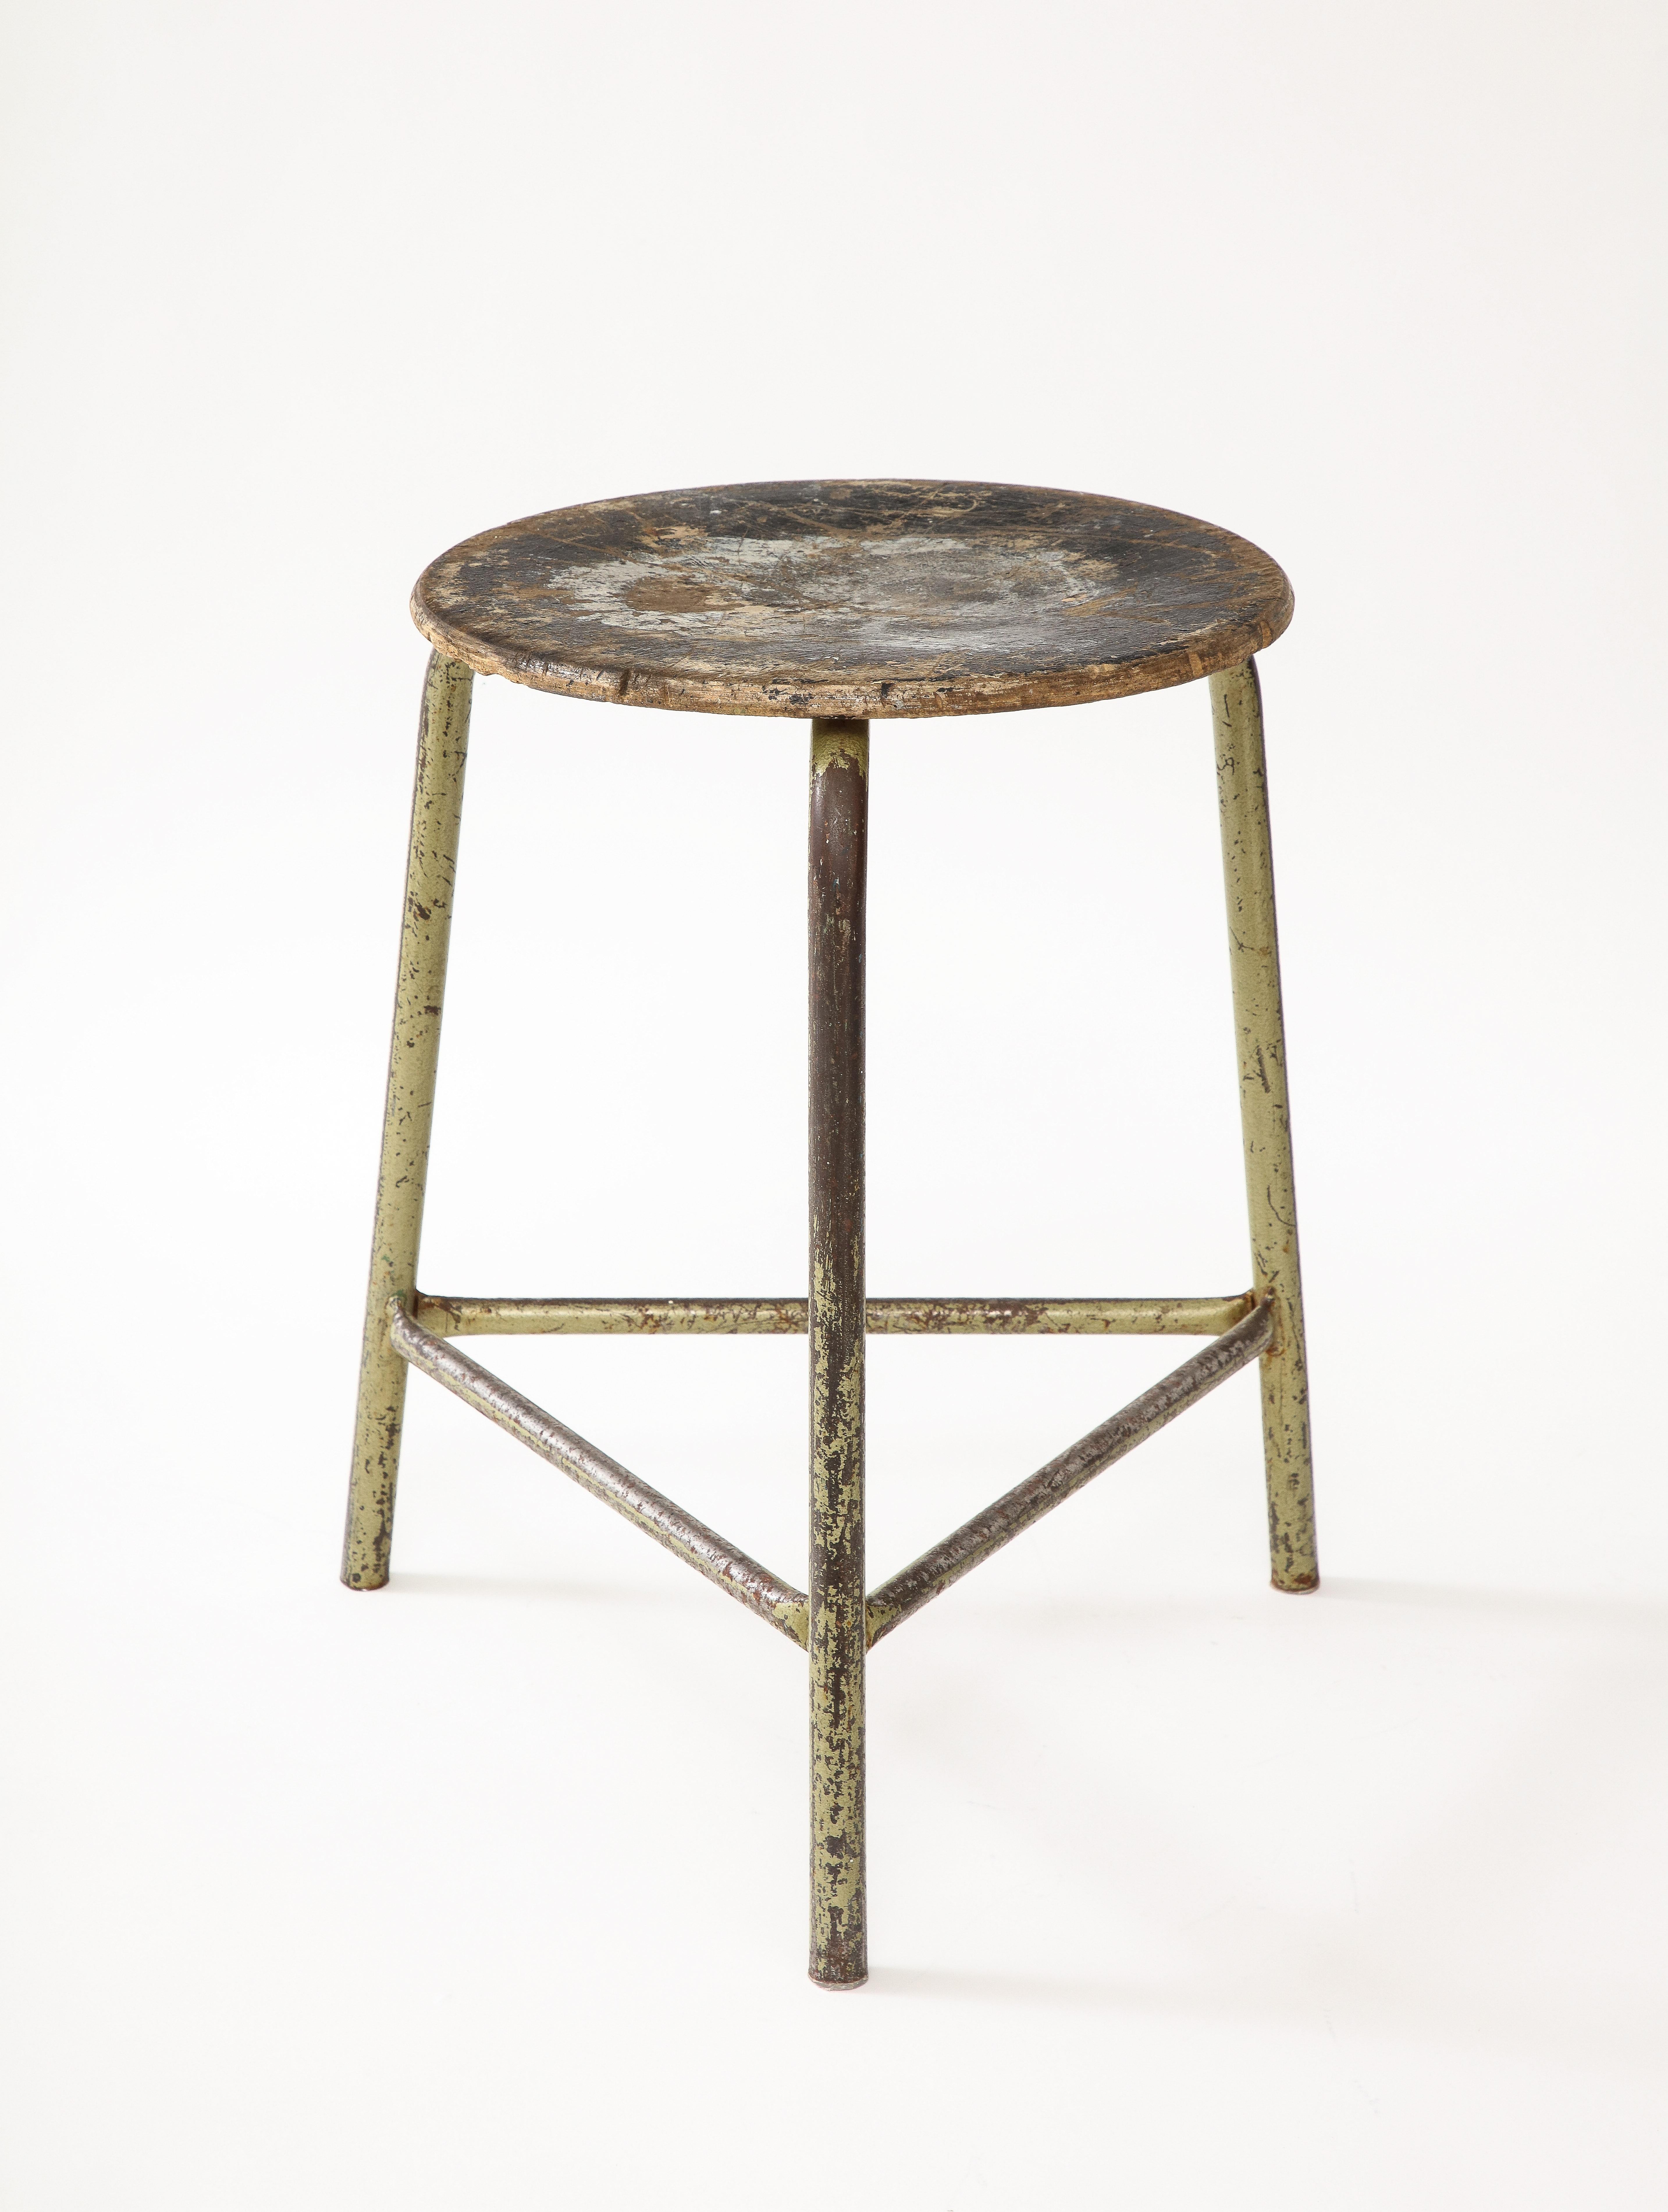 Worn, industrial French stool with lots of character.